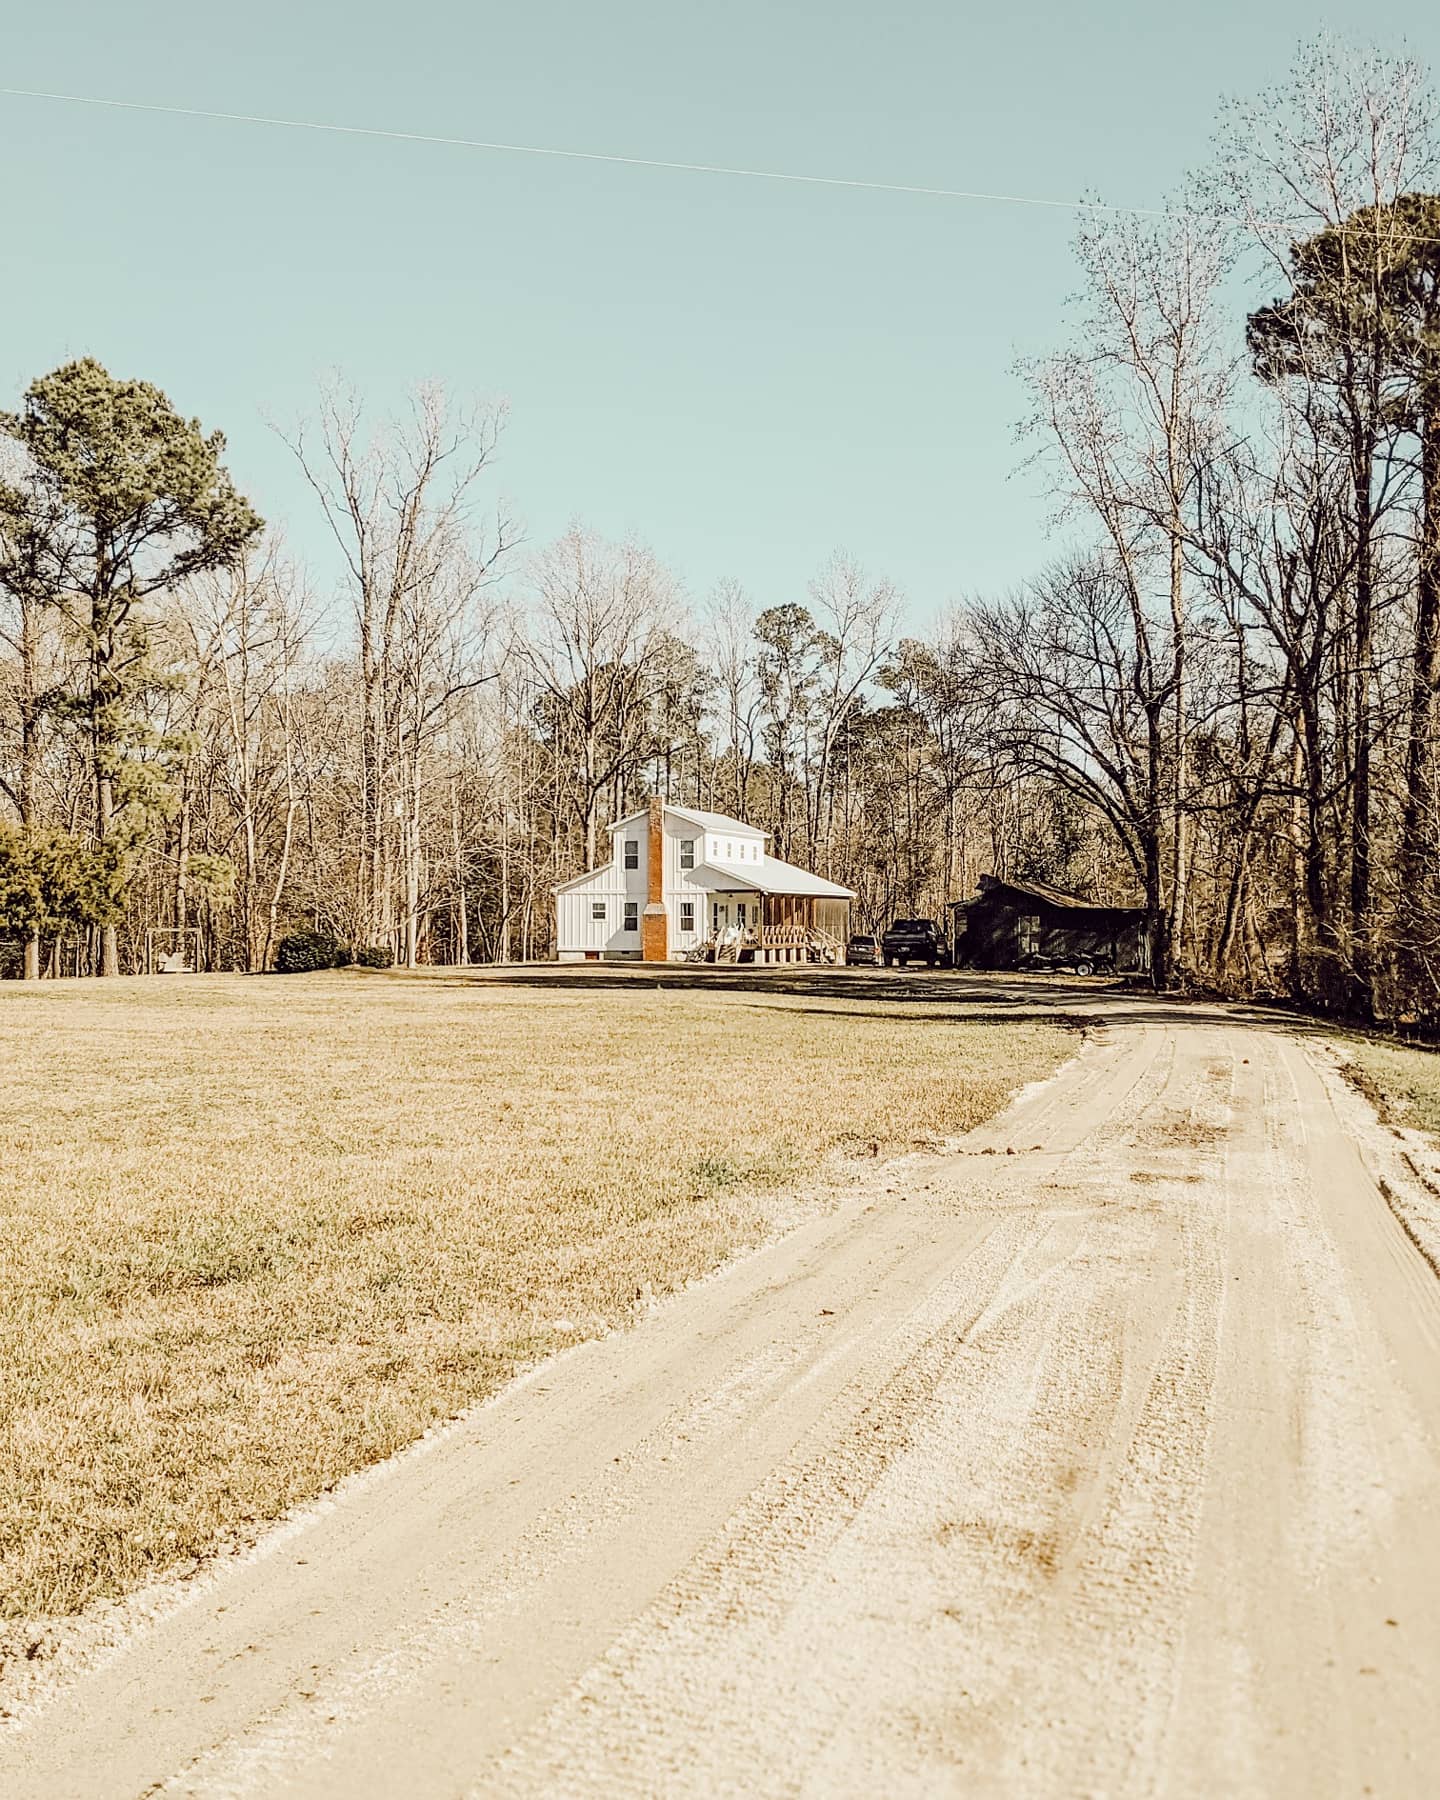 White farmhouse at the end of an old dirt road